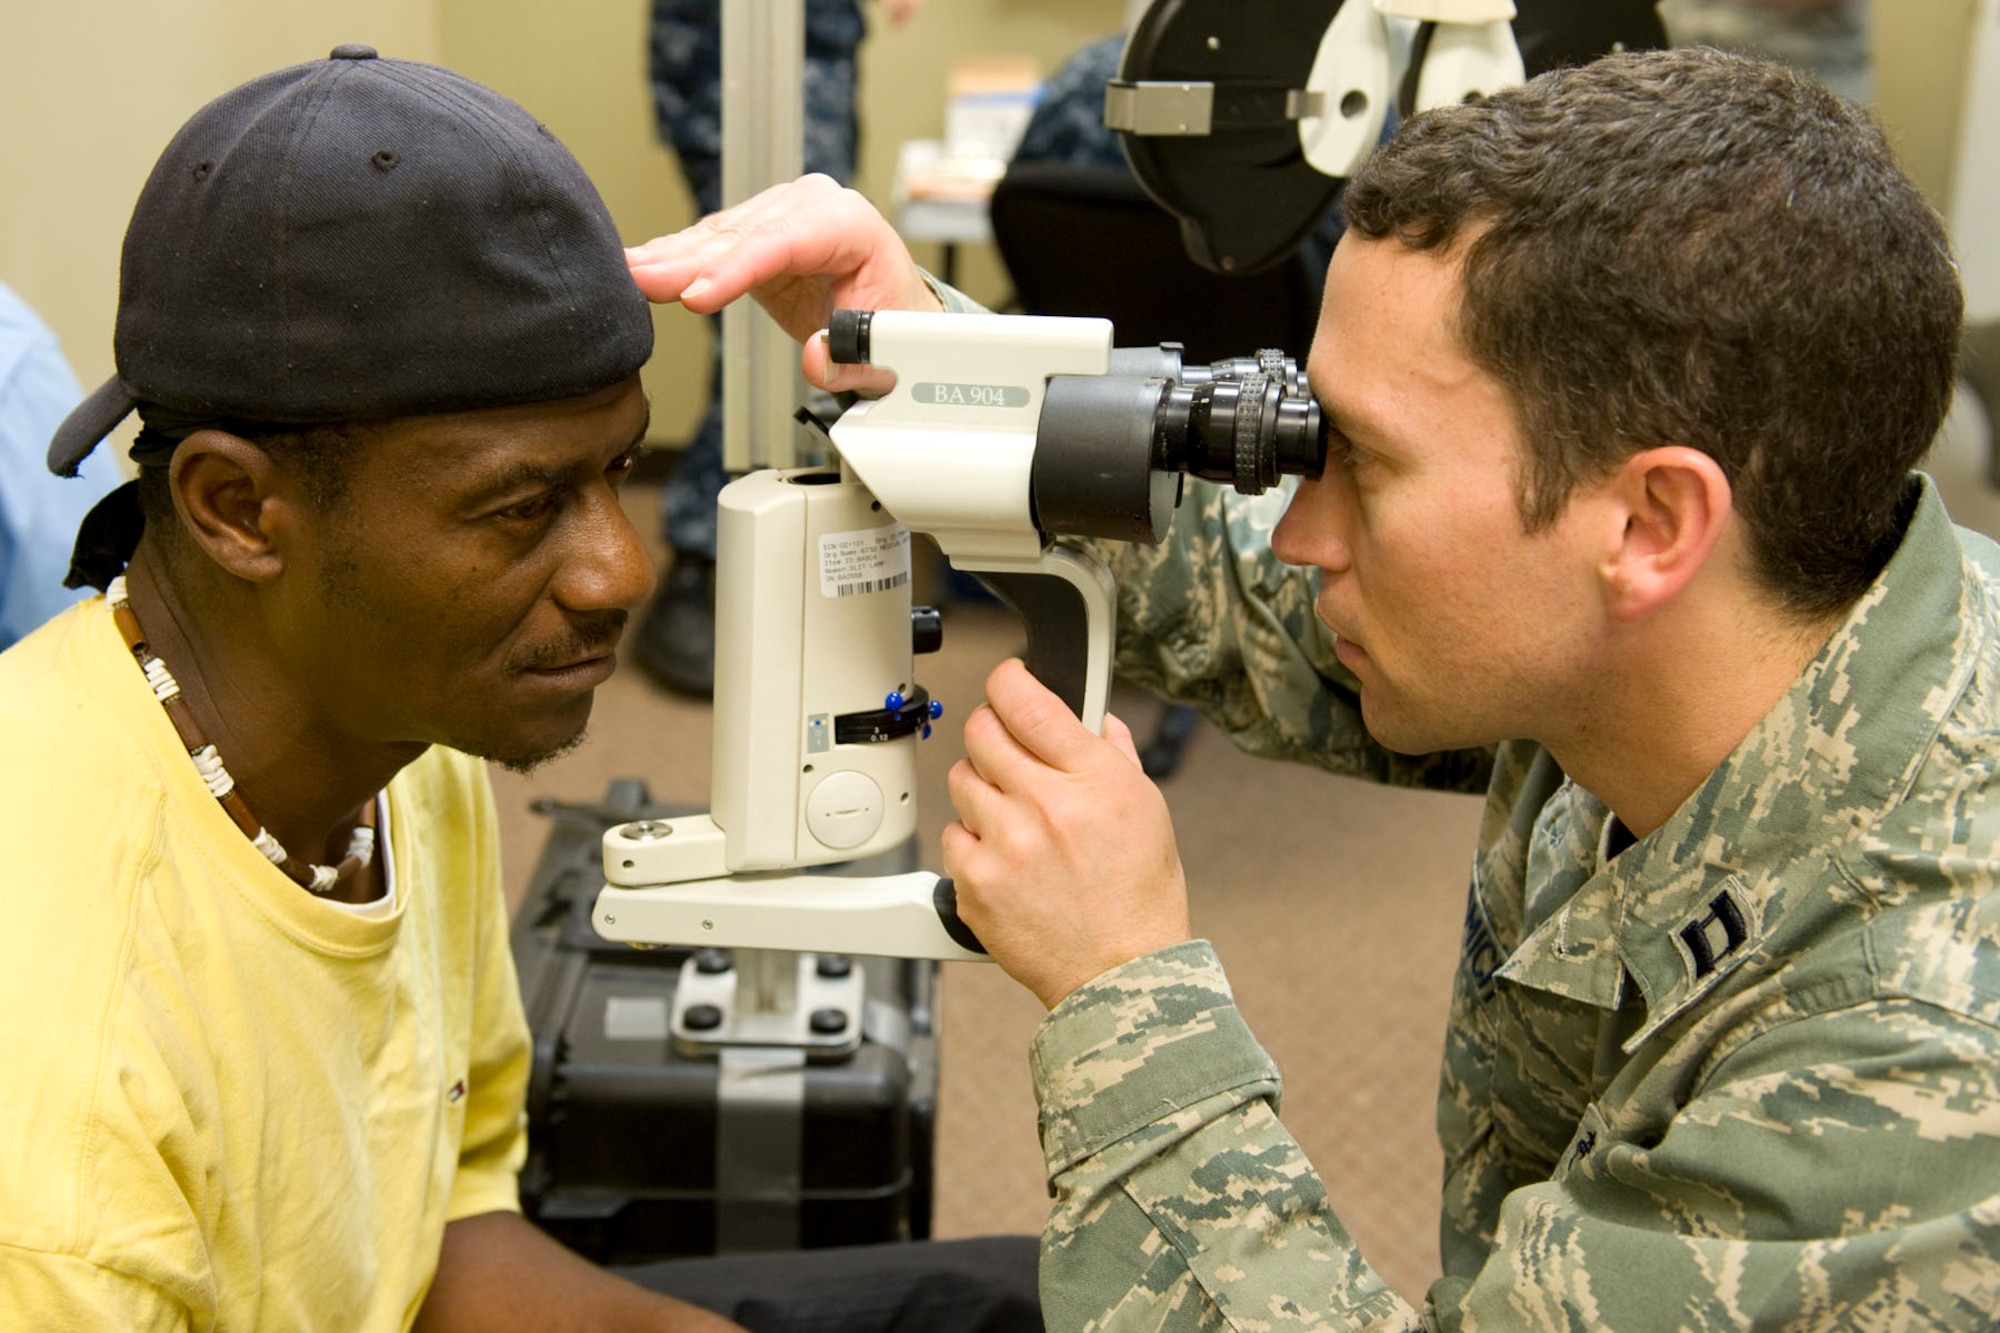 HAYNEVILLE, Ala. - Capt. Andrew Adamich, an optometrist from the 176th Medical Group, Alaska Air National Guard, uses a portable slit lamp biomicroscope on his patient to get a magnified view of his eye, May 4, 2011. Adamich and about 35 other members from the 176th Wing are in Alabama for an Innovative Readiness Training (IRT) mission. The IRT program allows for real world training opportunities for military personnel while providing needed services to under-served communities in the United States.  Alaska Air National Guard photo by Master Sgt. Shannon Oleson.